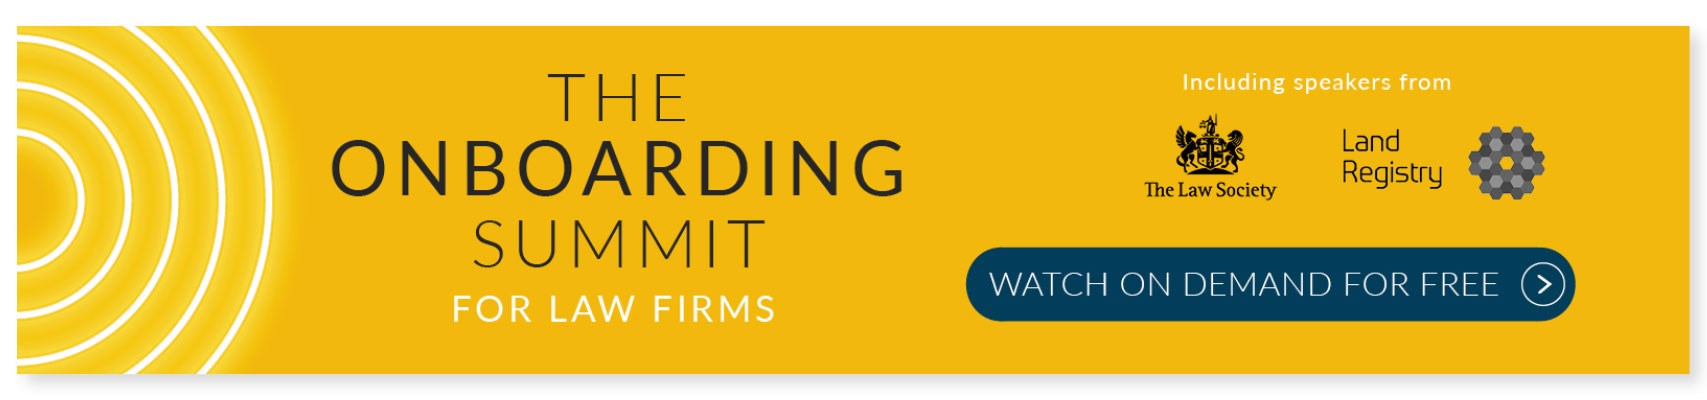 the onboarding summit watch on demand banner on yellow